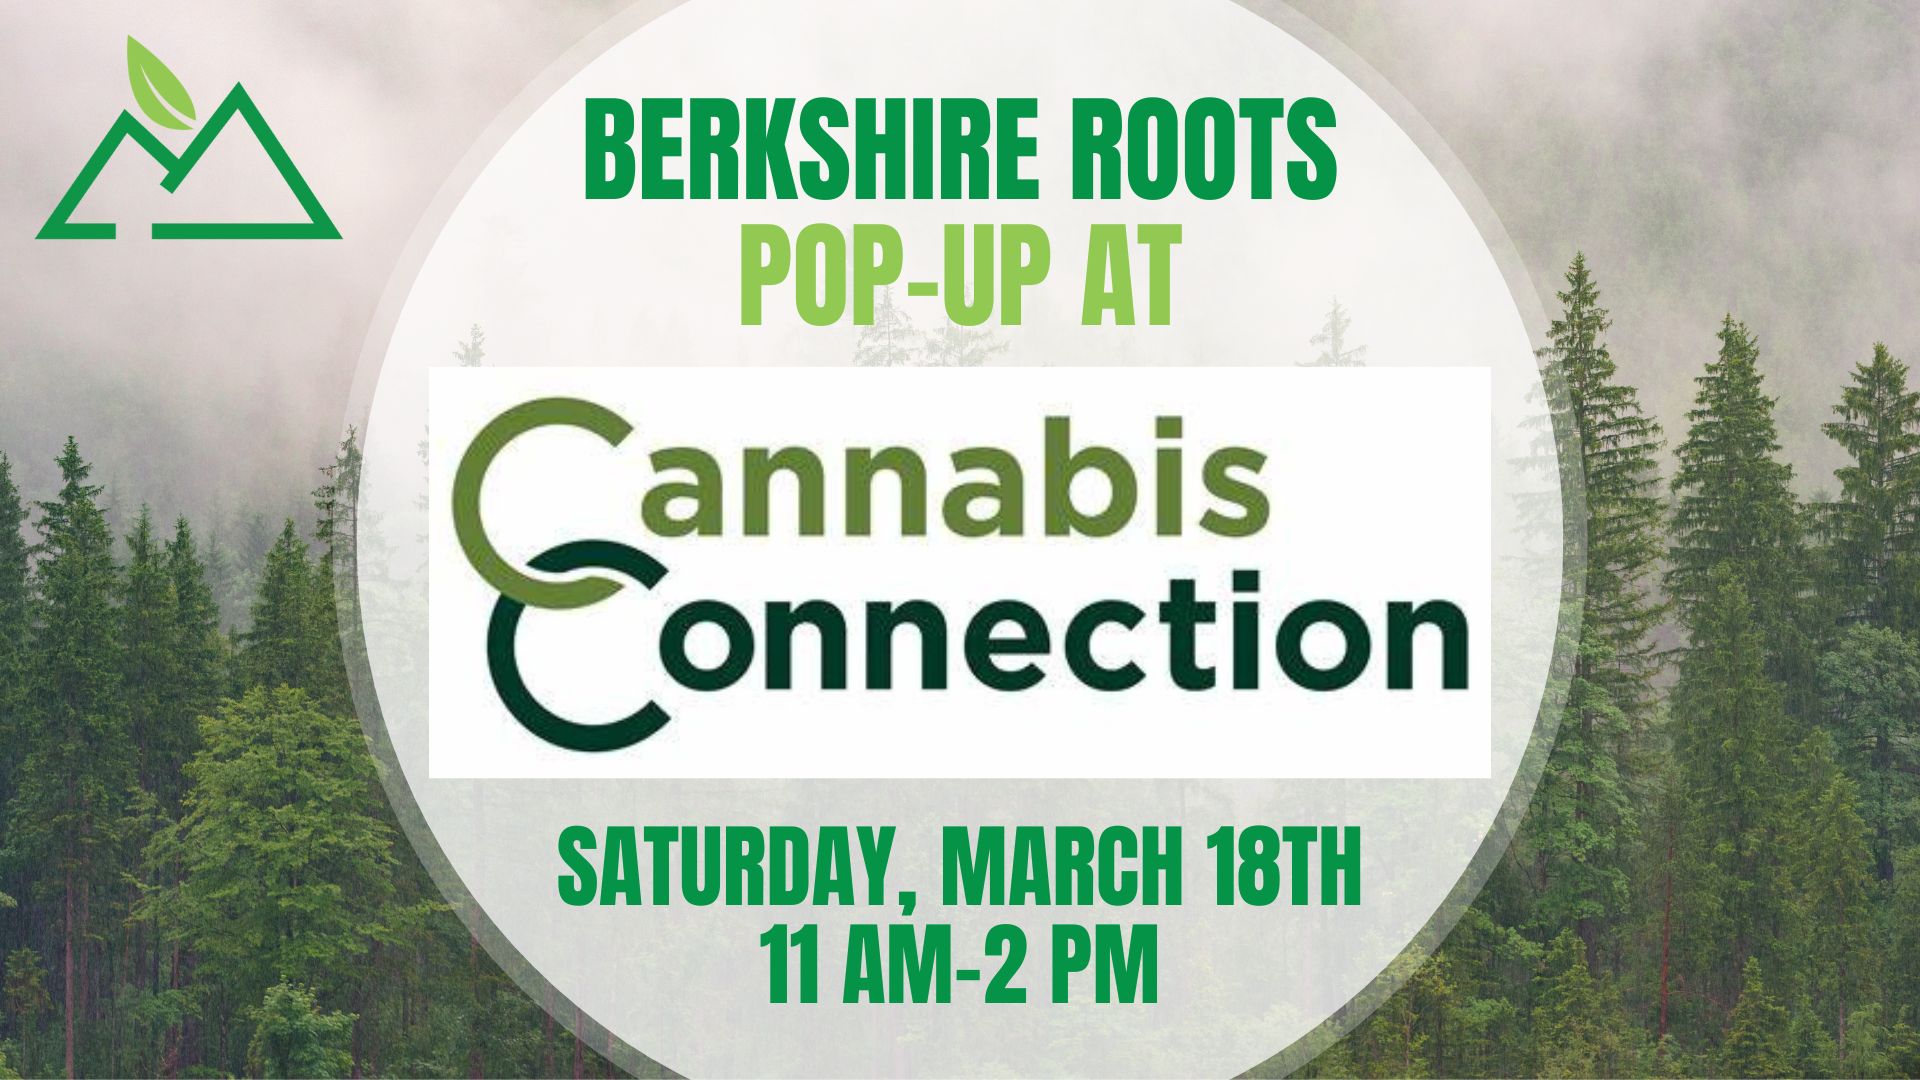 Berkshire Roots pop up at Cannabis Connection